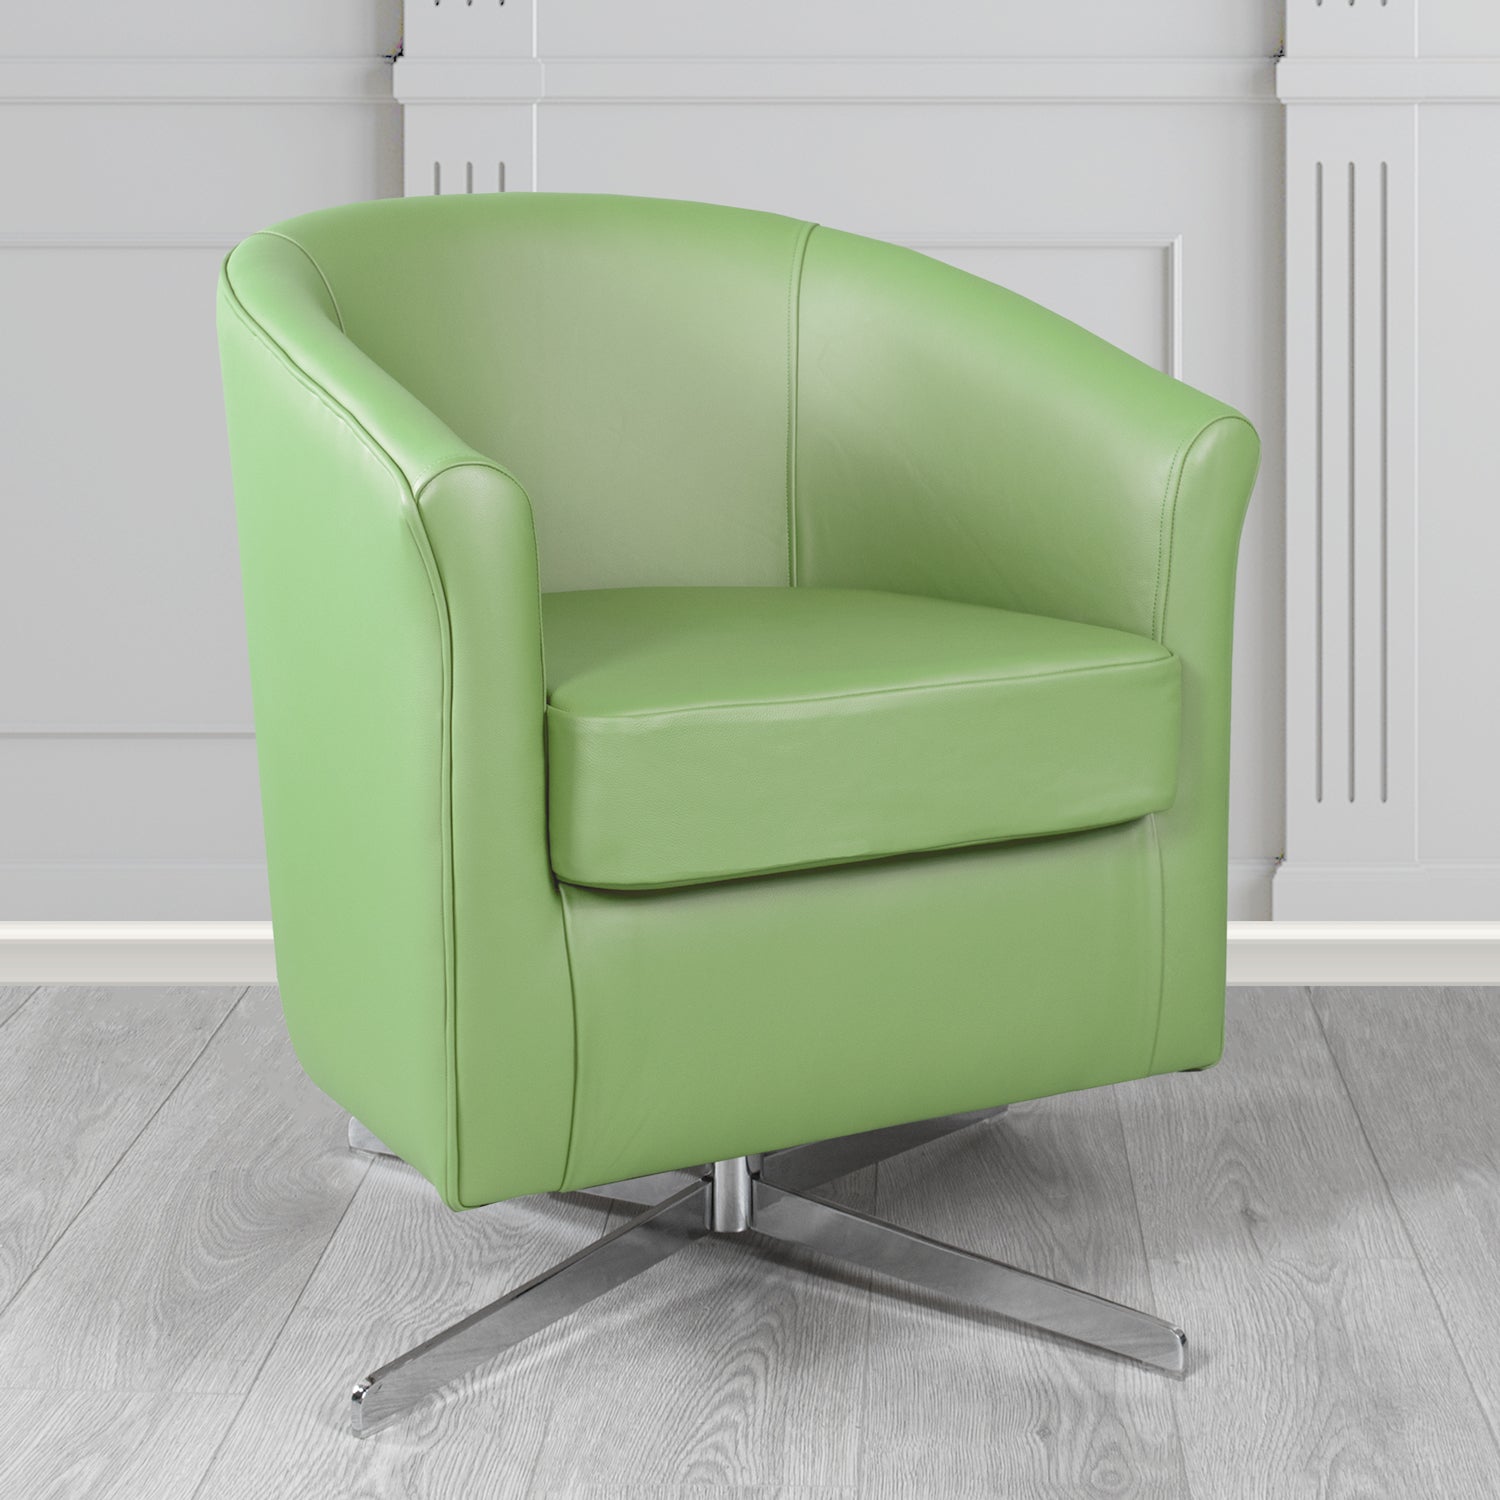 Cannes Swivel Tub Chair in Shelly Pea Green Crib 5 Genuine Leather - The Tub Chair Shop